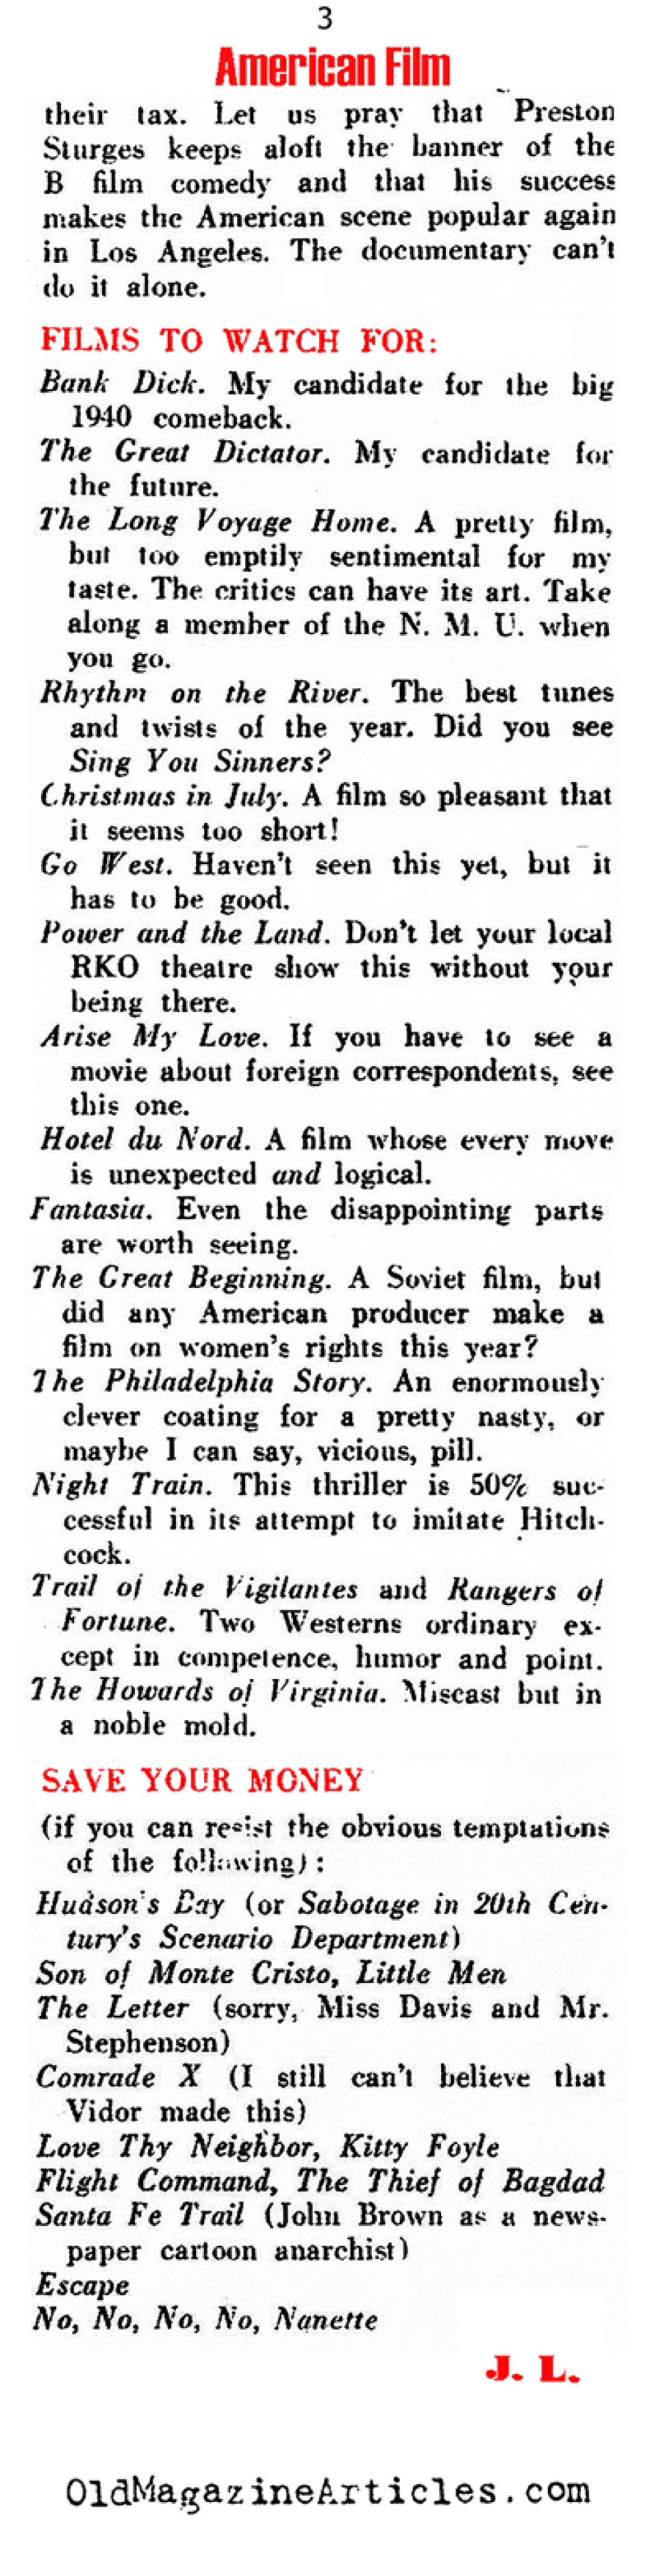 Thoughts on the American Films of 1941 (Direction Magazine, 1941)